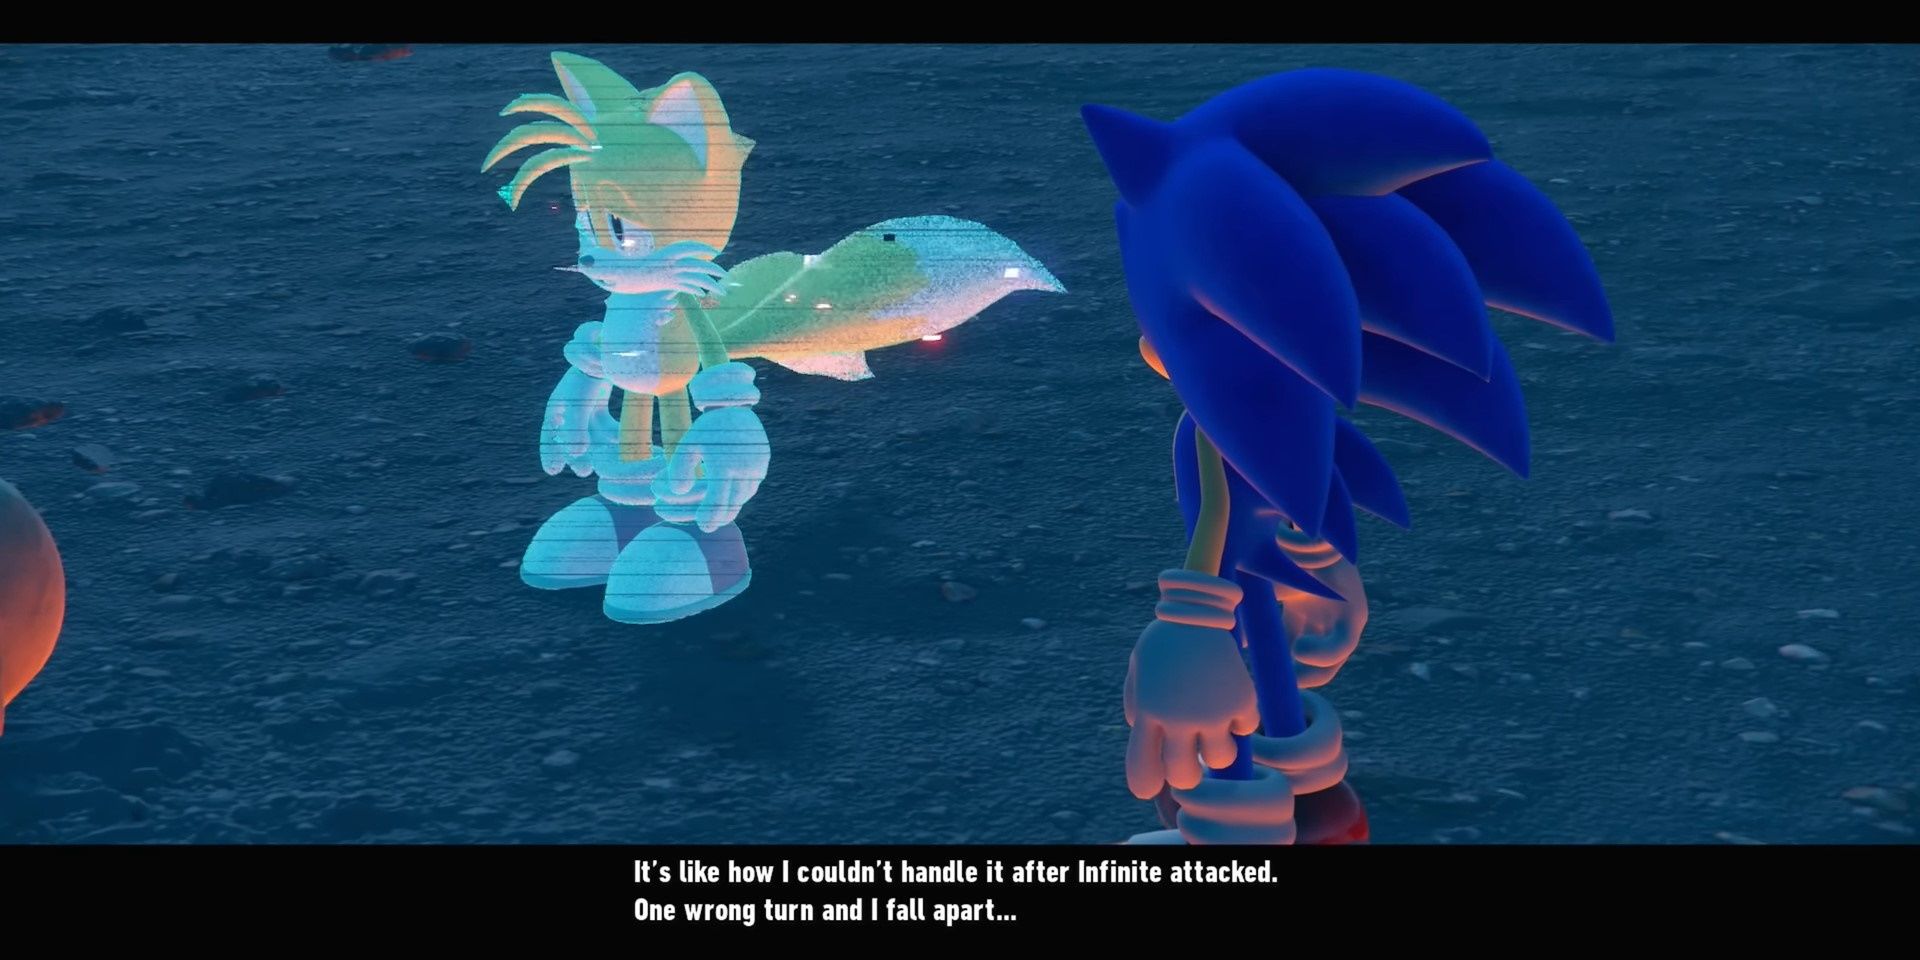 Tails explains to Sonic how the events of the islands remind him of his past